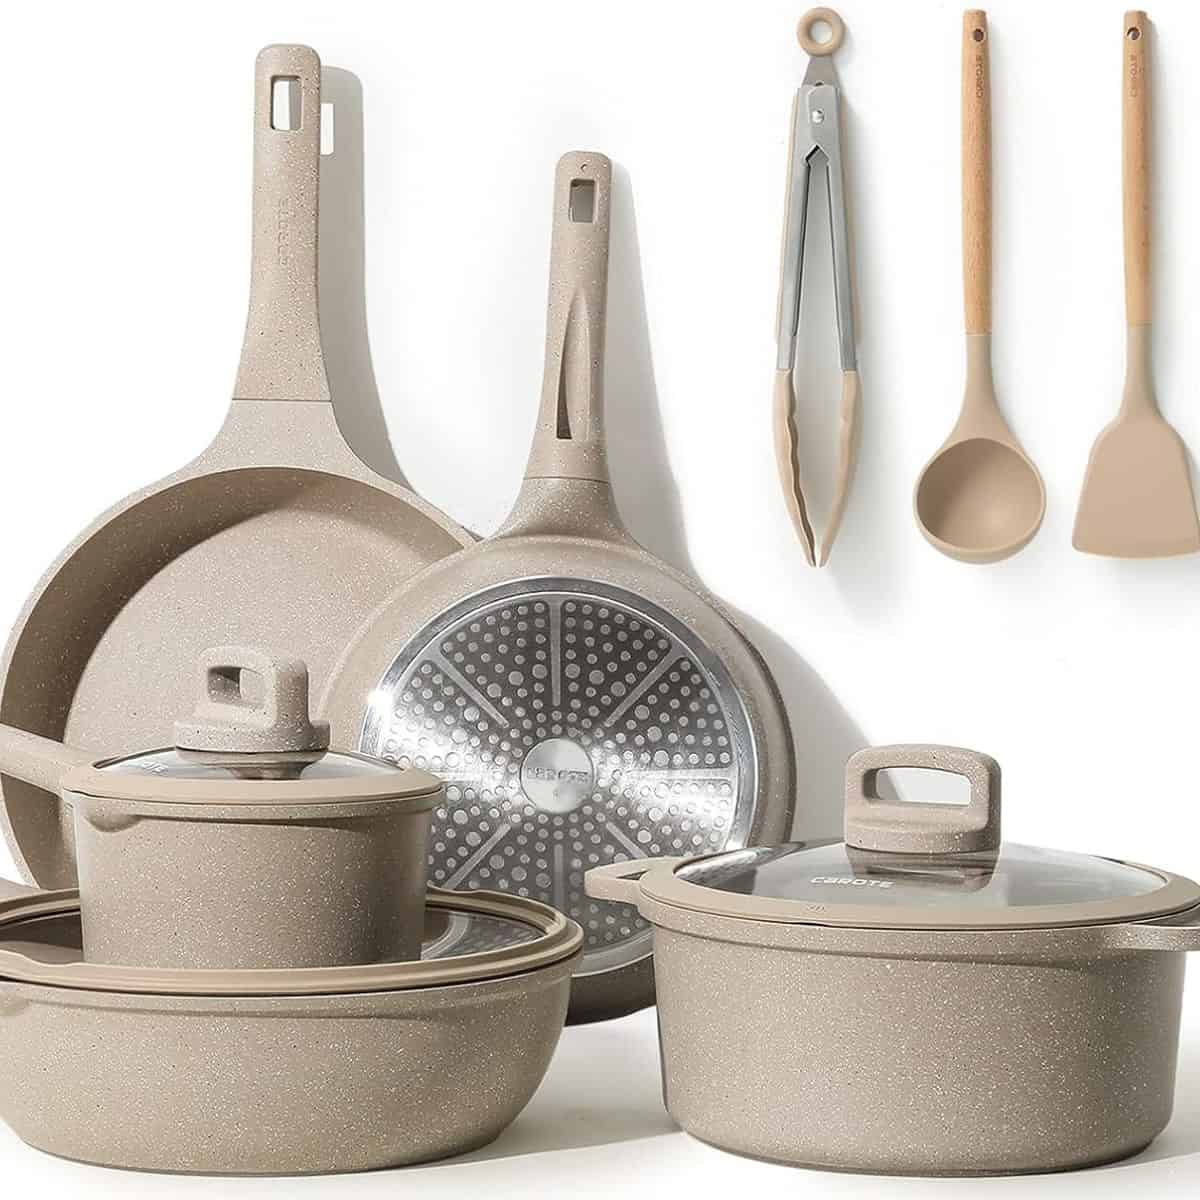 My Favorite Kitchen Deals from Amazon’s Spring Prime Day Sale!